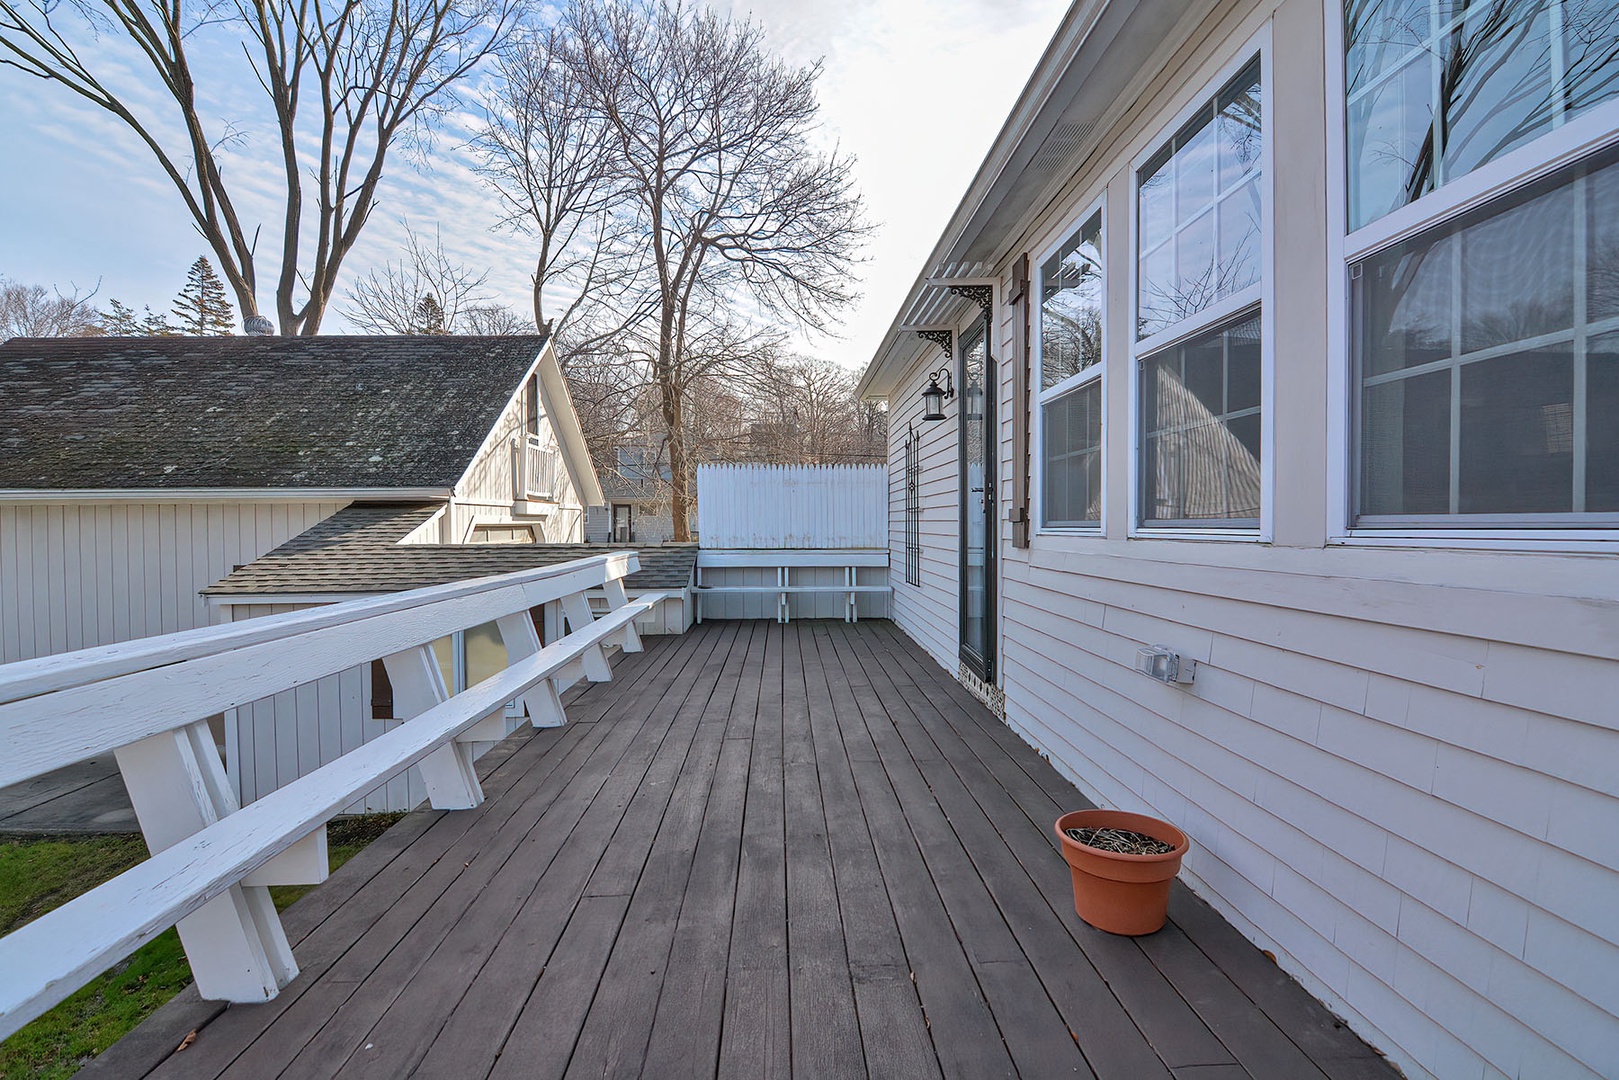 The large-sized deck has built-in benches.